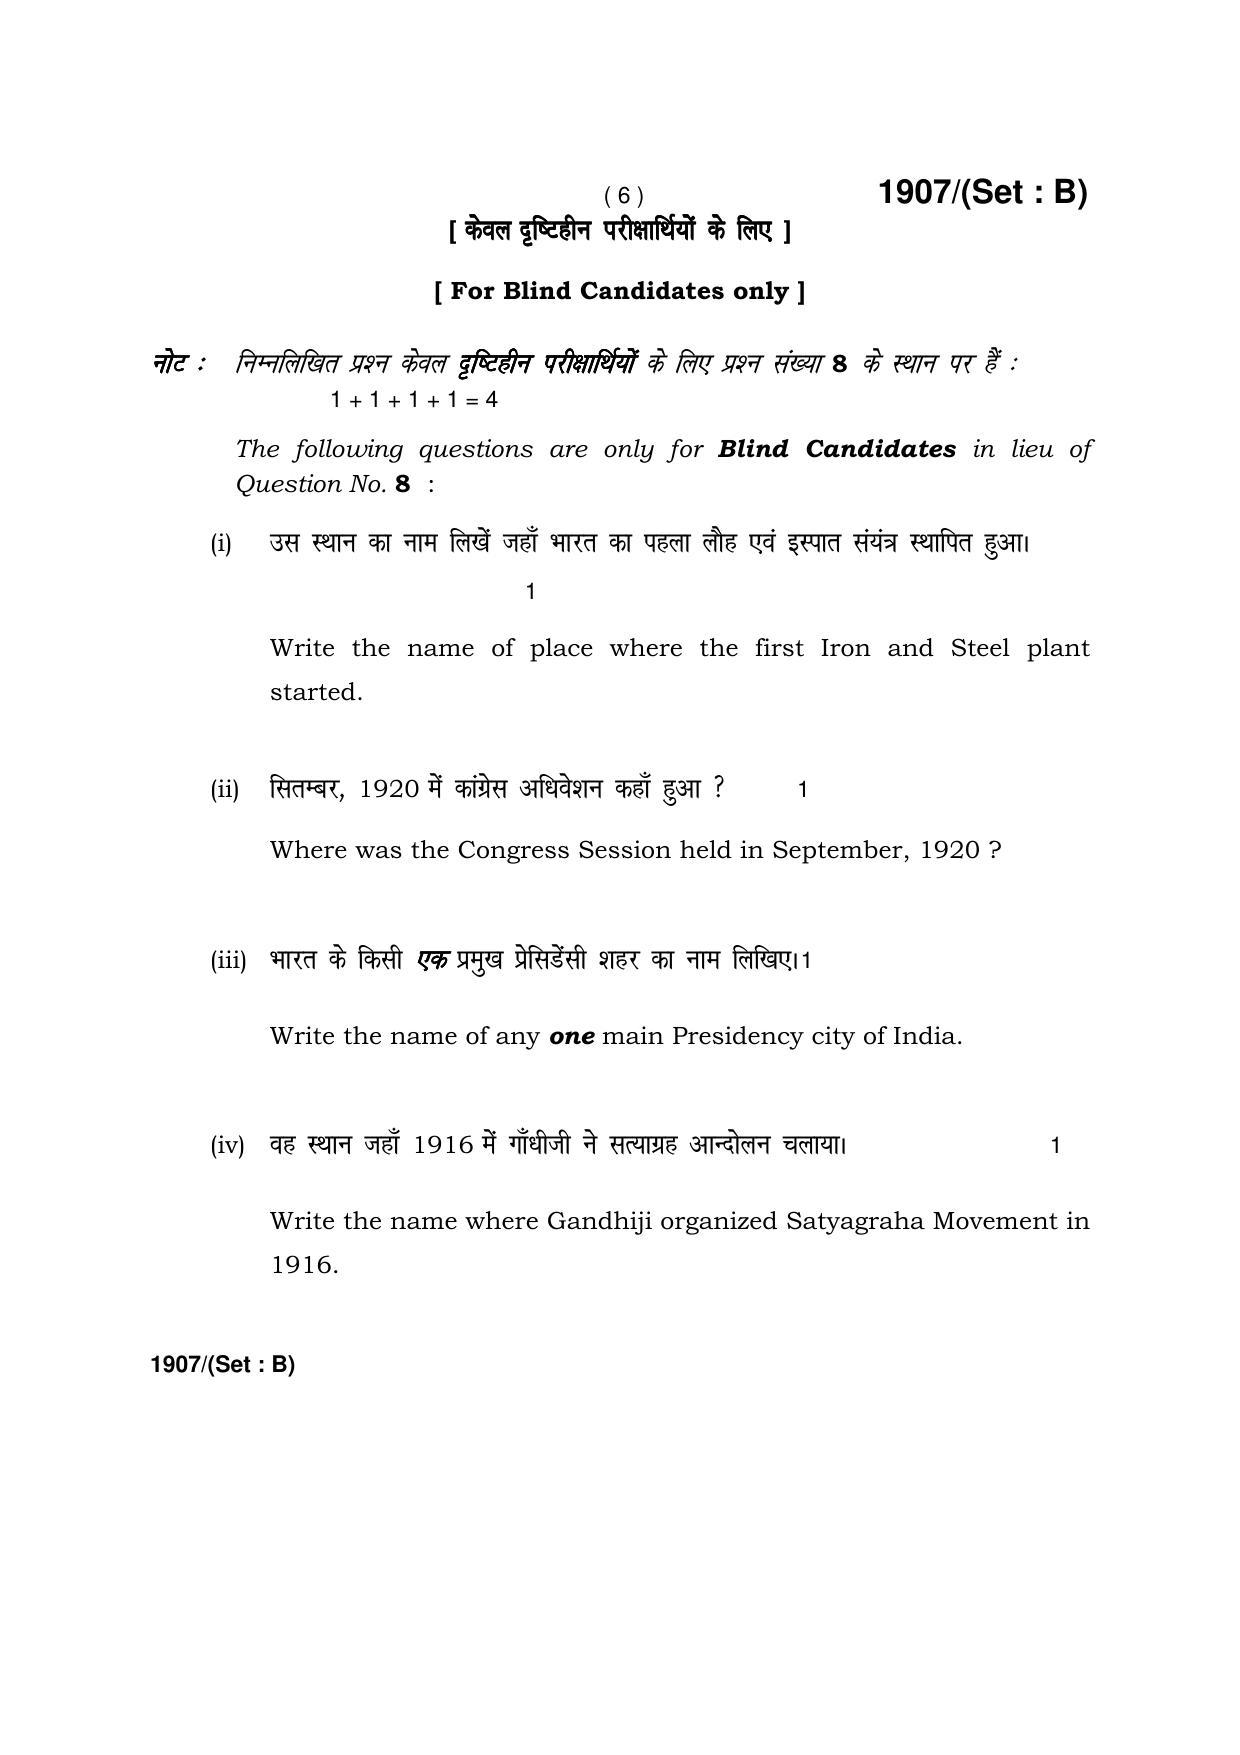 Haryana Board HBSE Class 10 Social Science -B 2017 Question Paper - Page 6